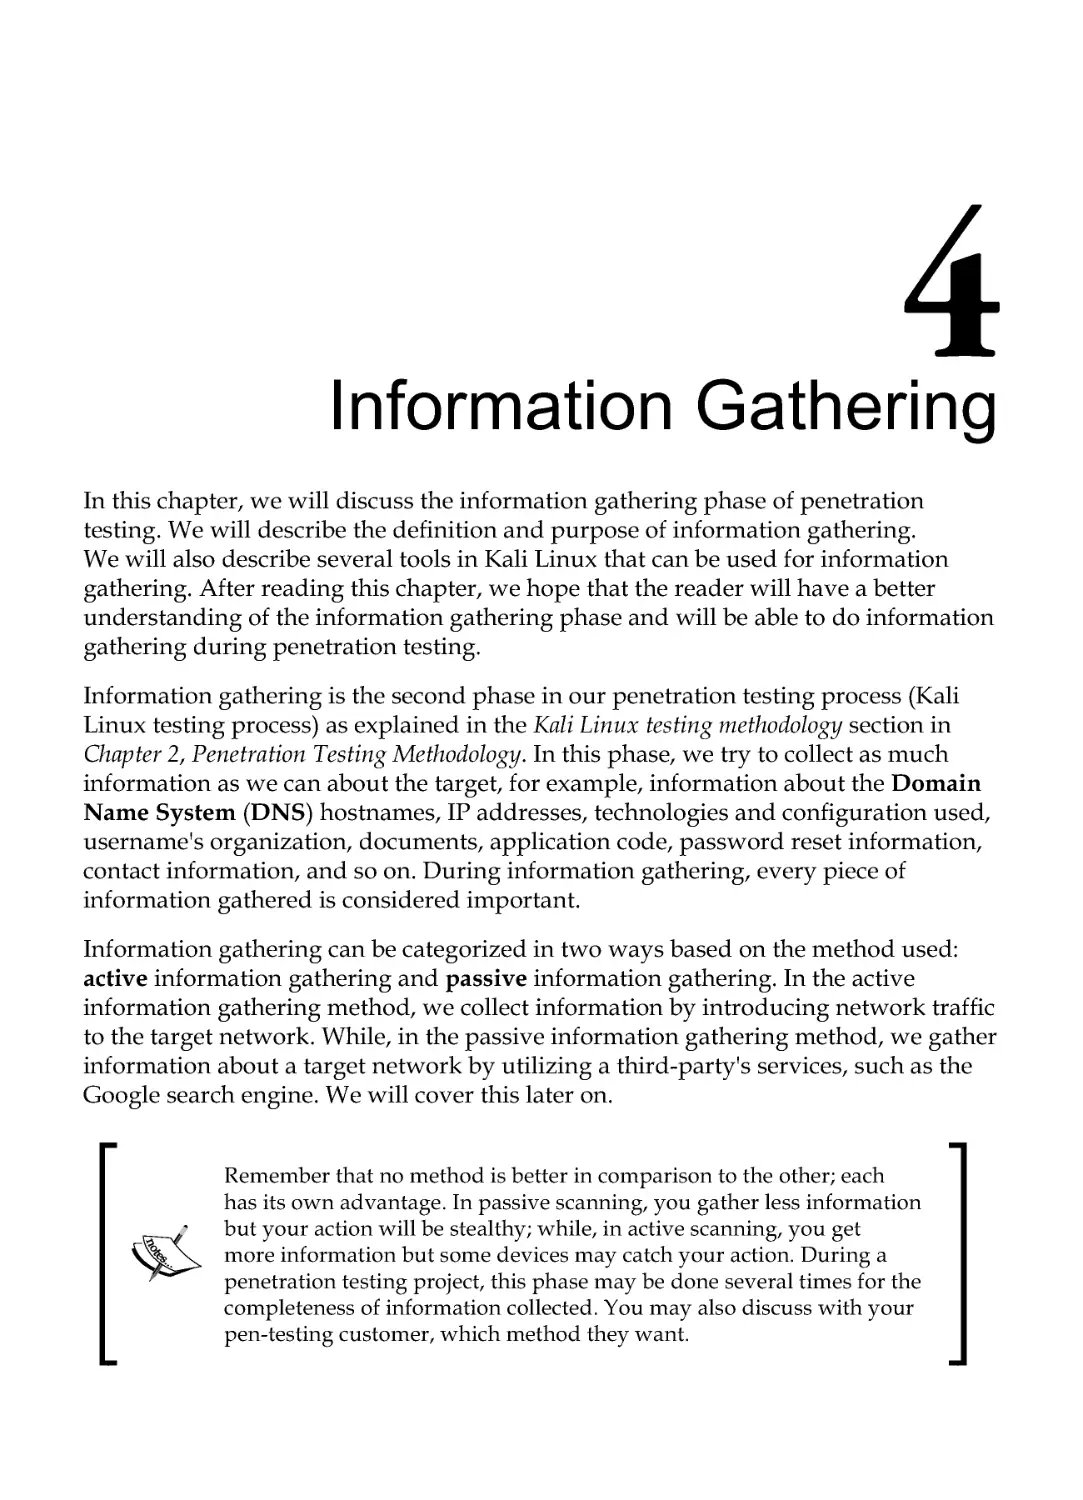 Chapter 4: Information Gathering